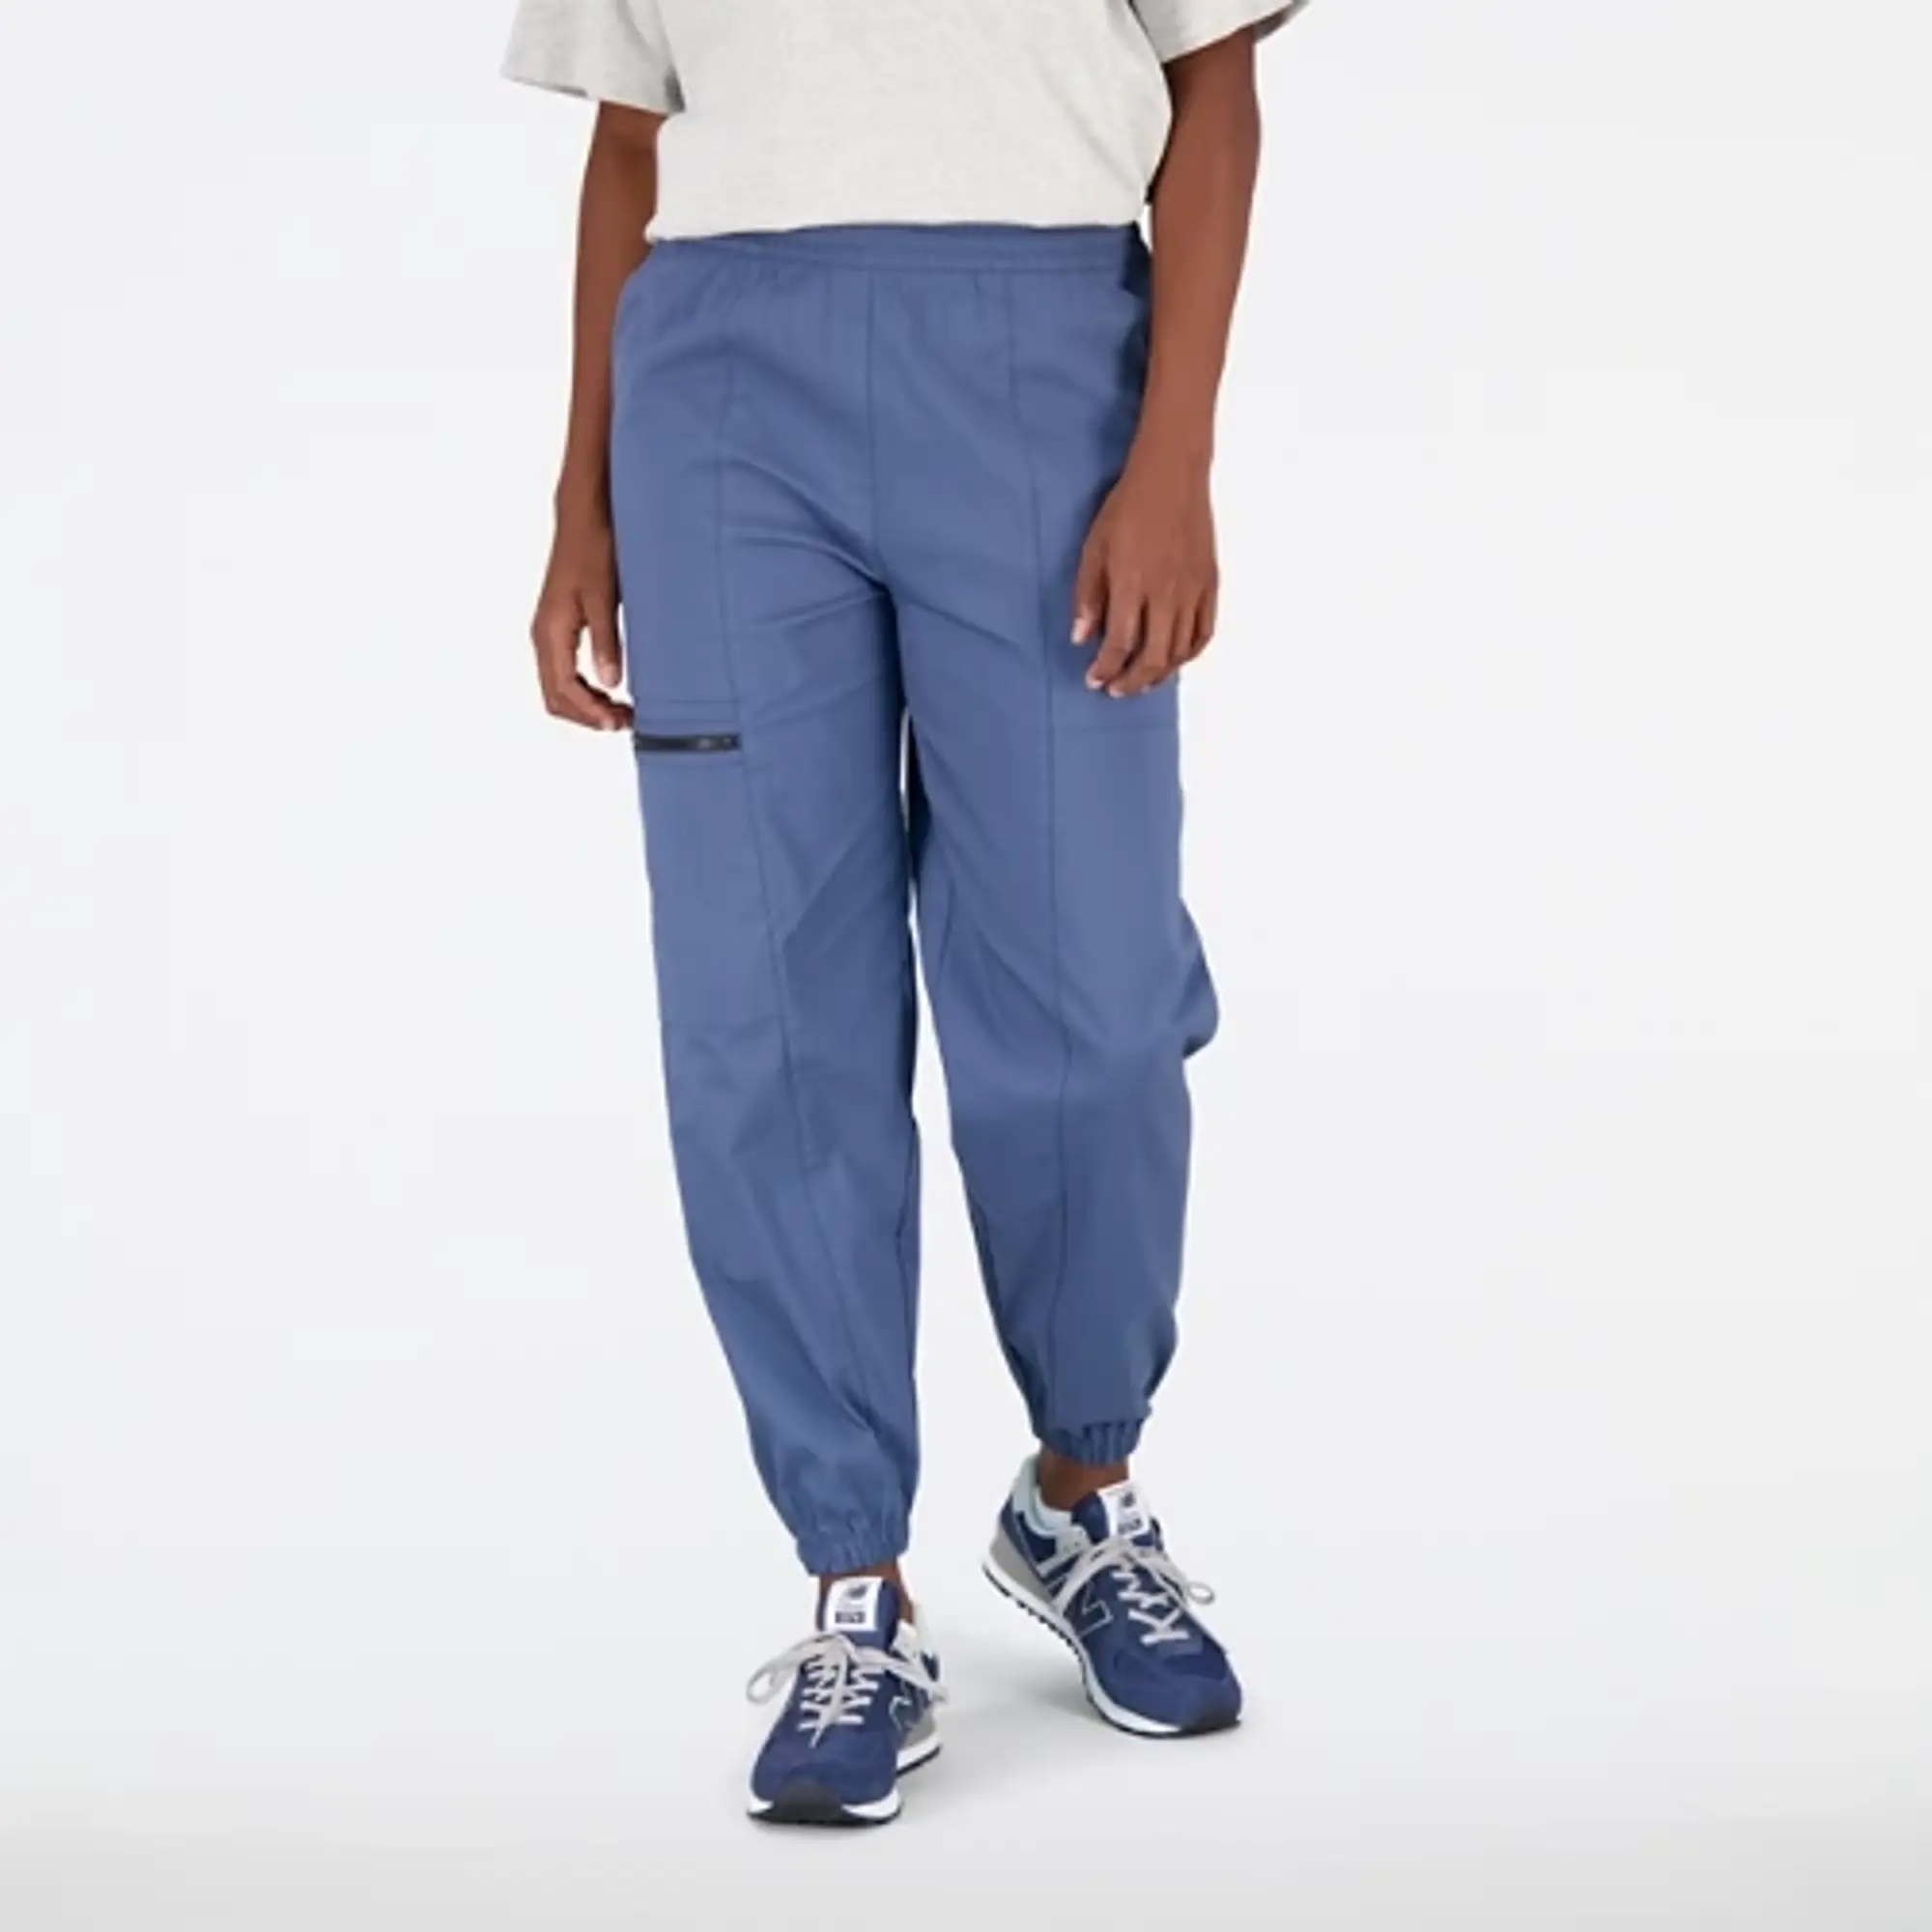 New Balance Women's AT Woven Pant in Blue Polywoven